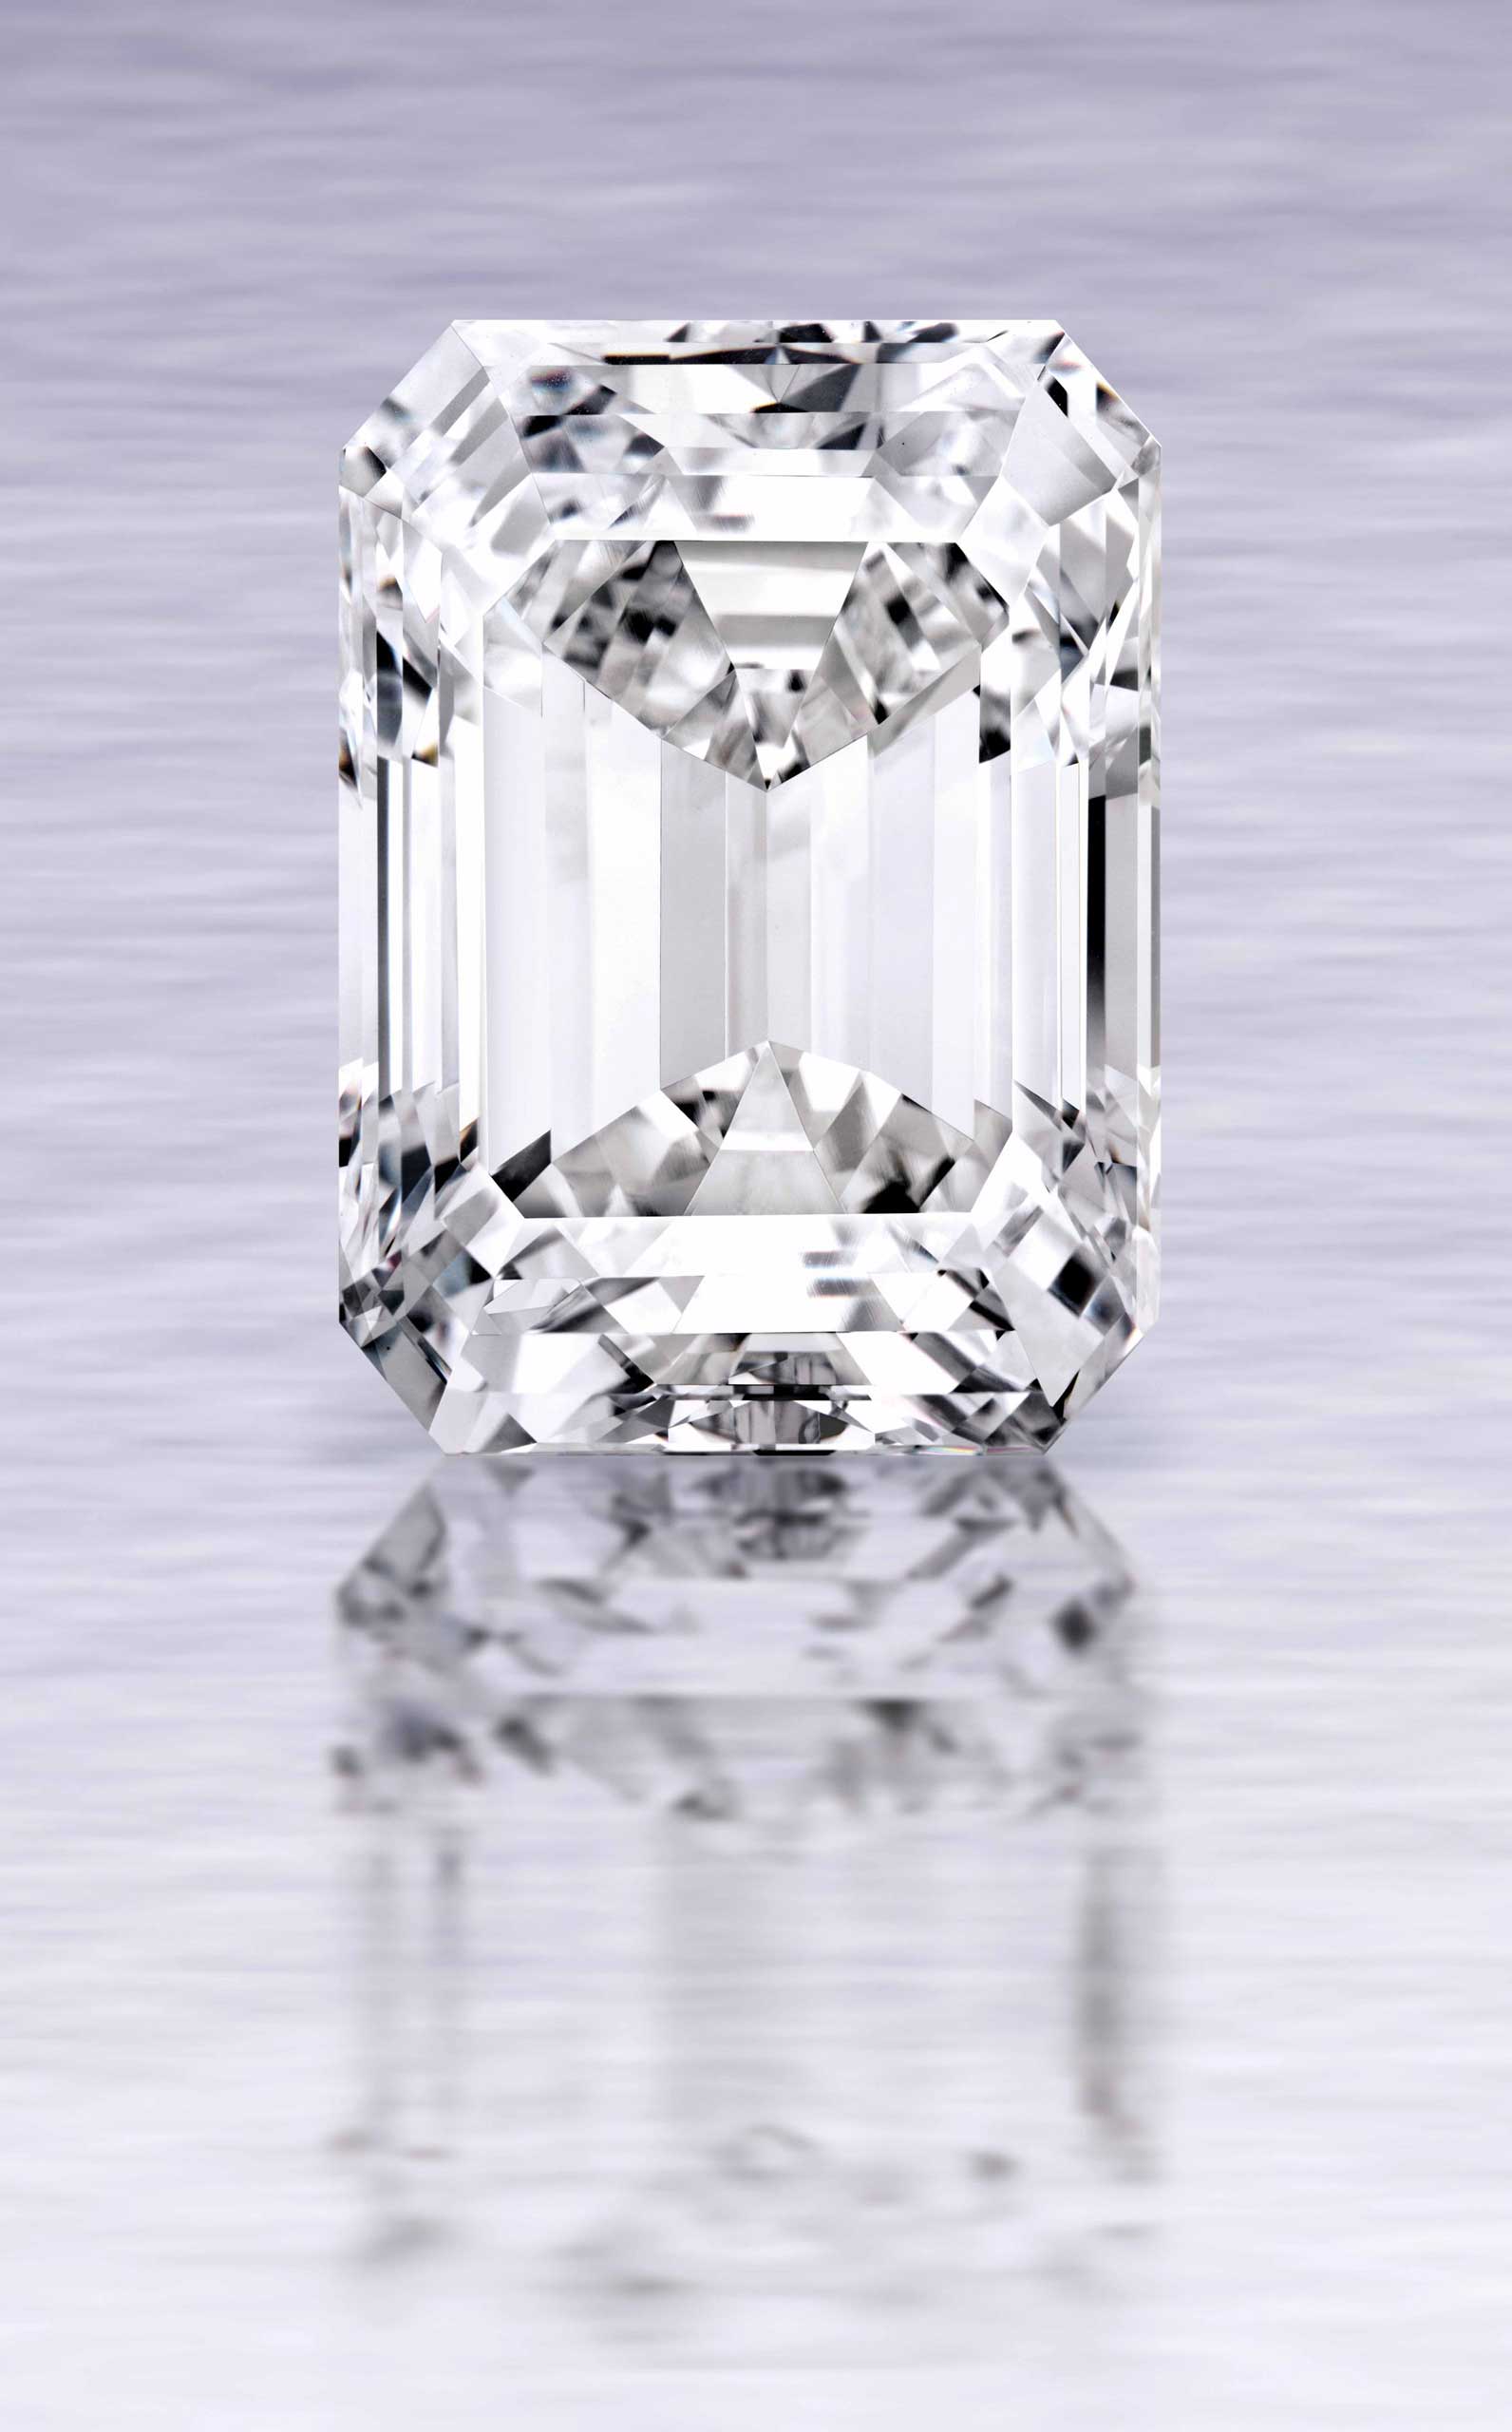 A 100-carat emerald-cut D color diamond, which was mined by De Beers in southern Africa.